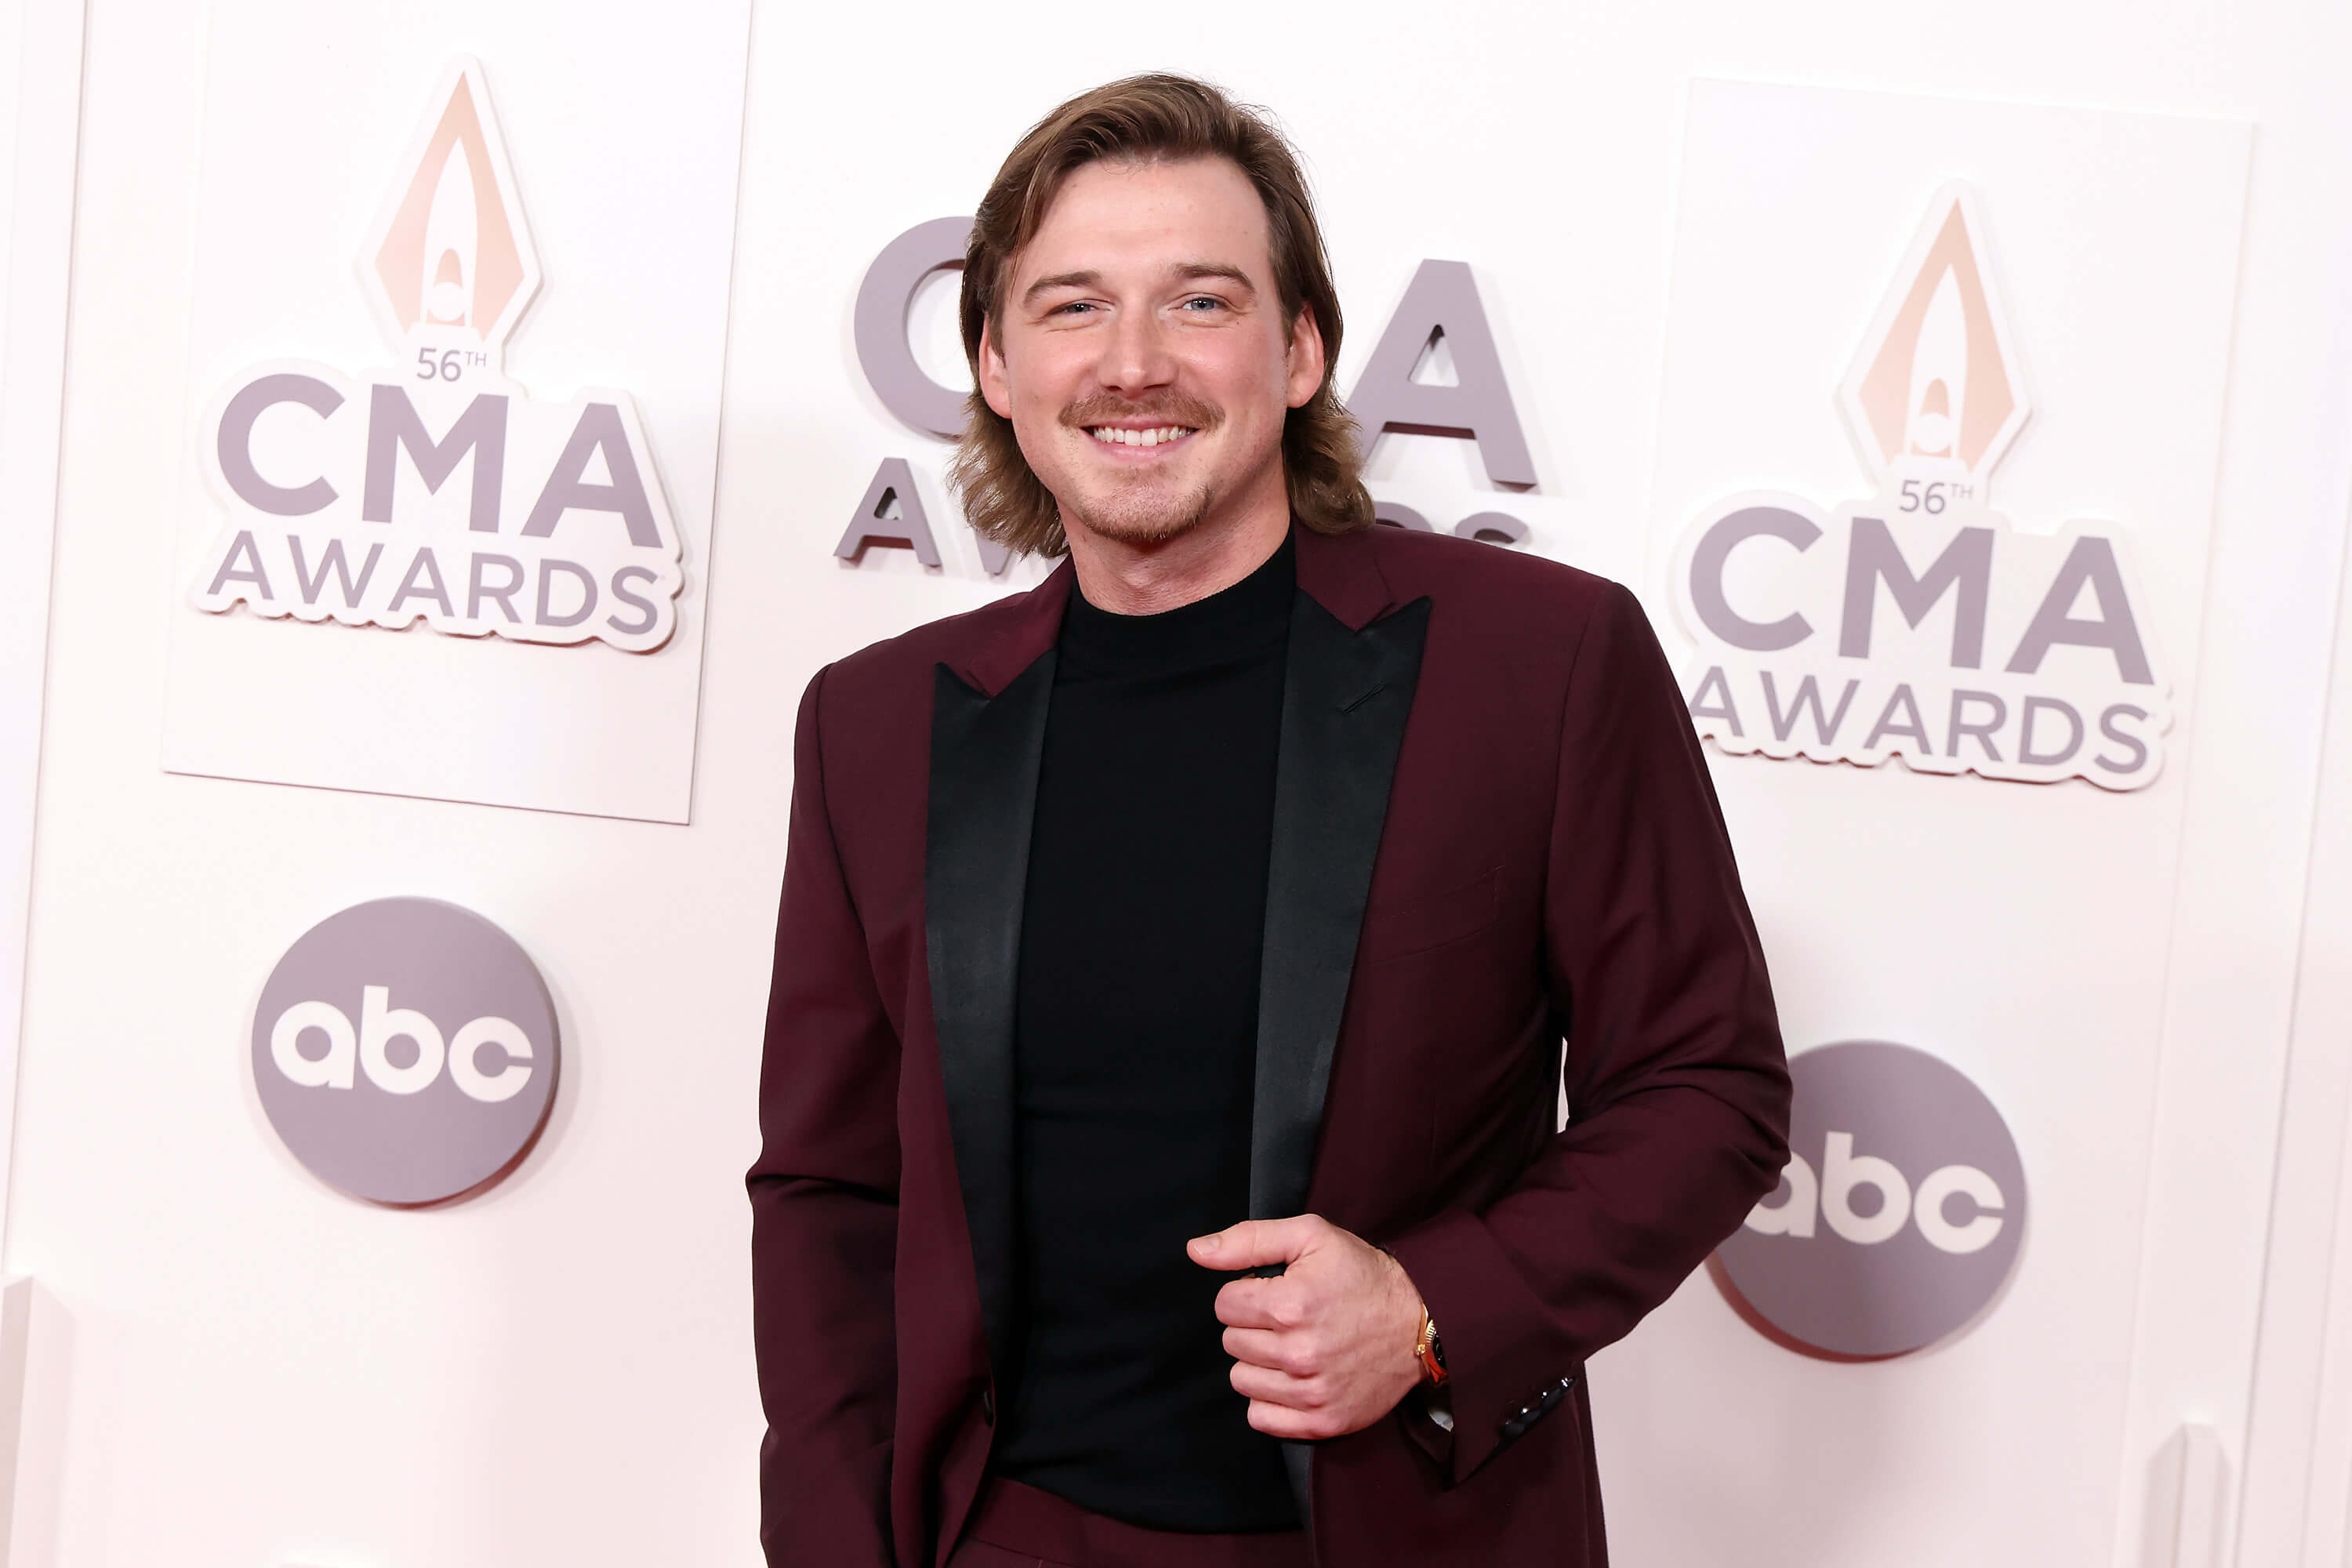 Morgan Wallen stands in front of a backdrop that reads 'CMA Awards' while wearing a burgundy suit